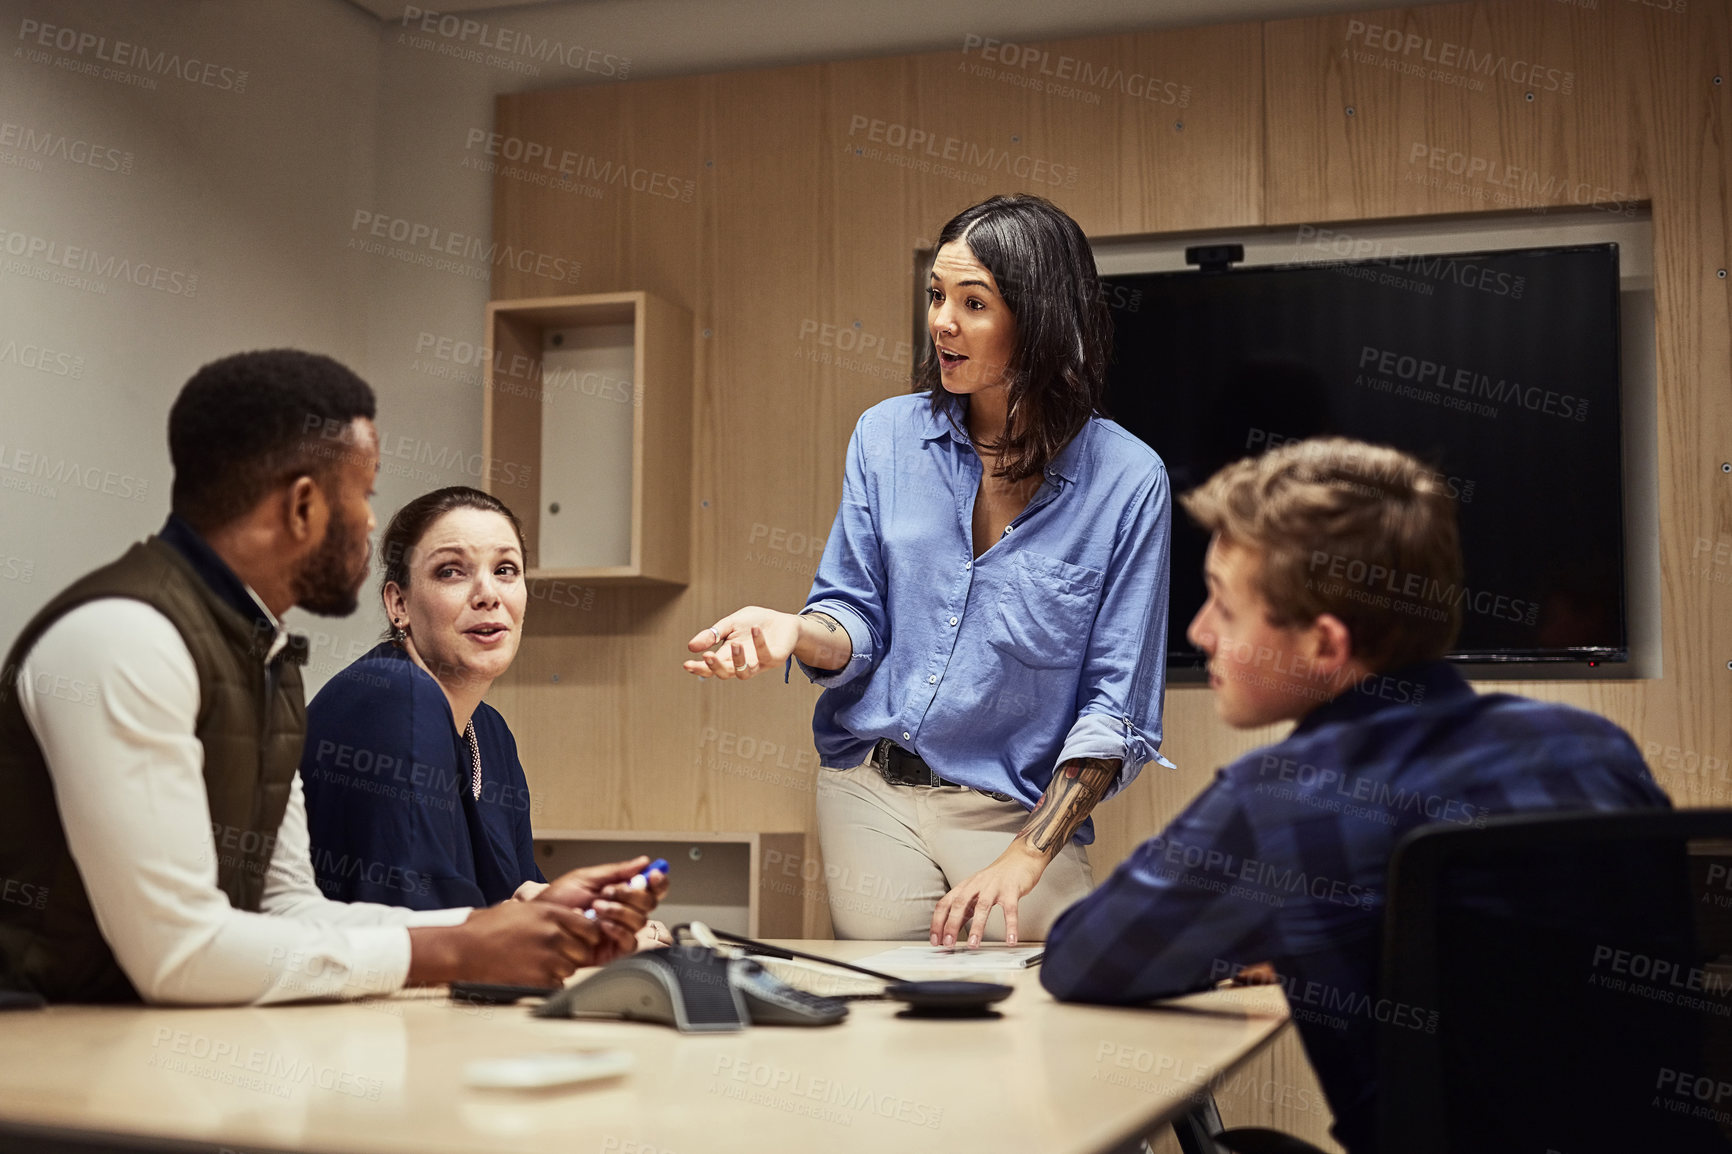 Buy stock photo Shot of a businesswoman giving a presentation to her colleagues in an office